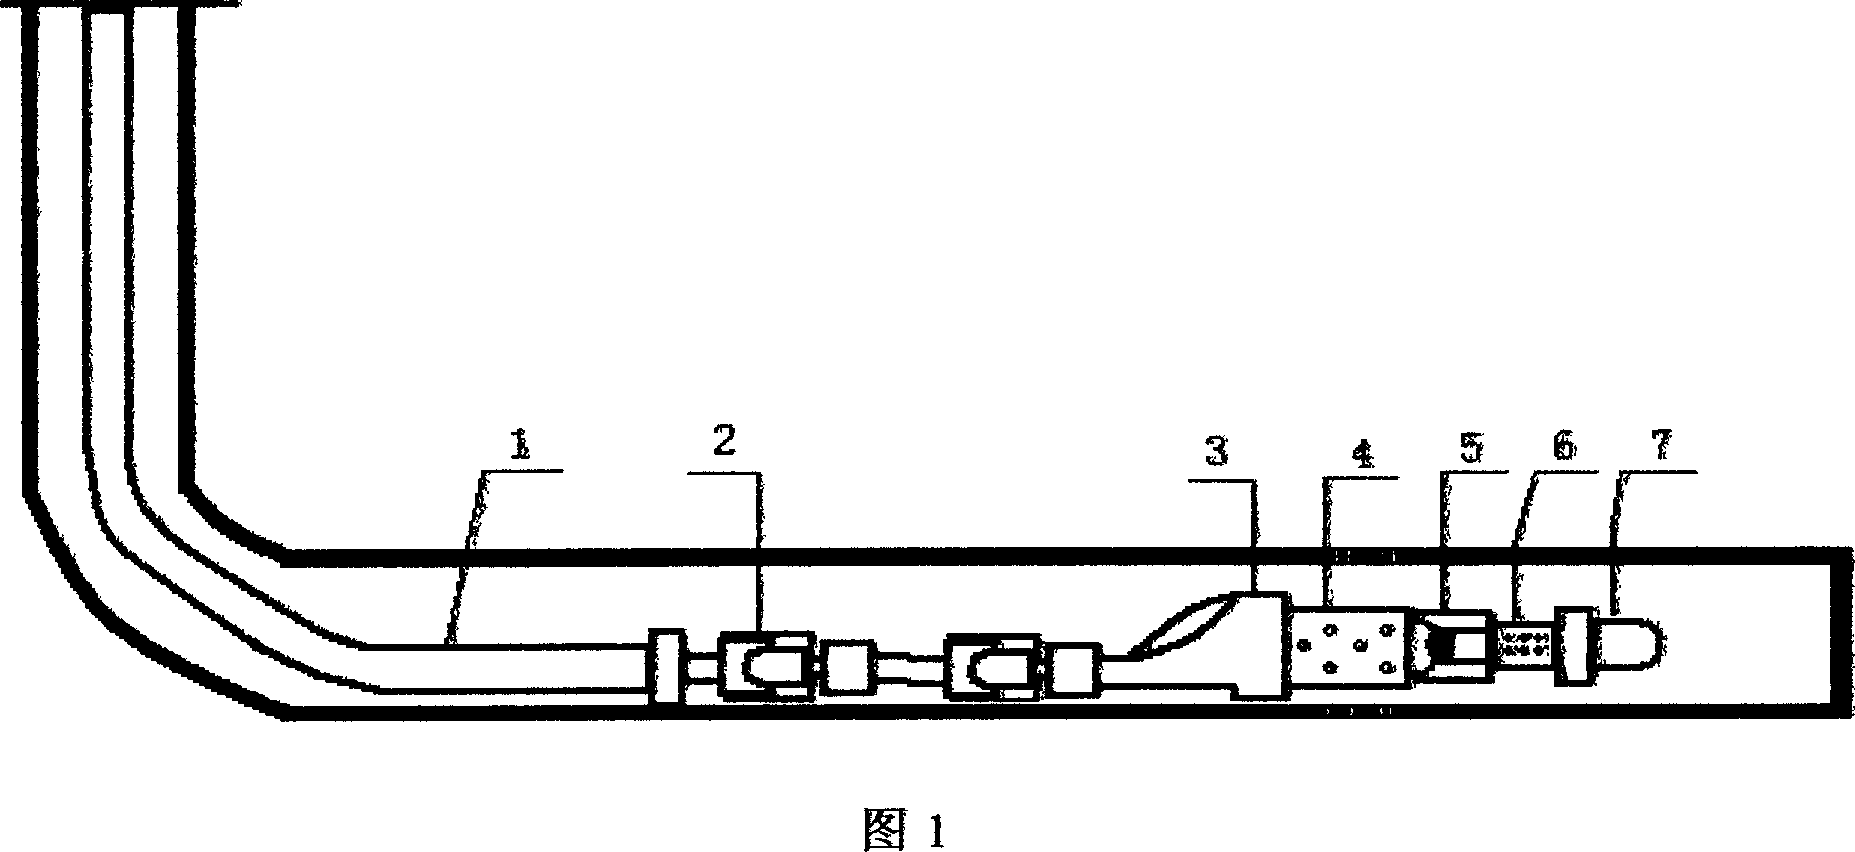 Perforation, fracturing integrated method and its technique pipe